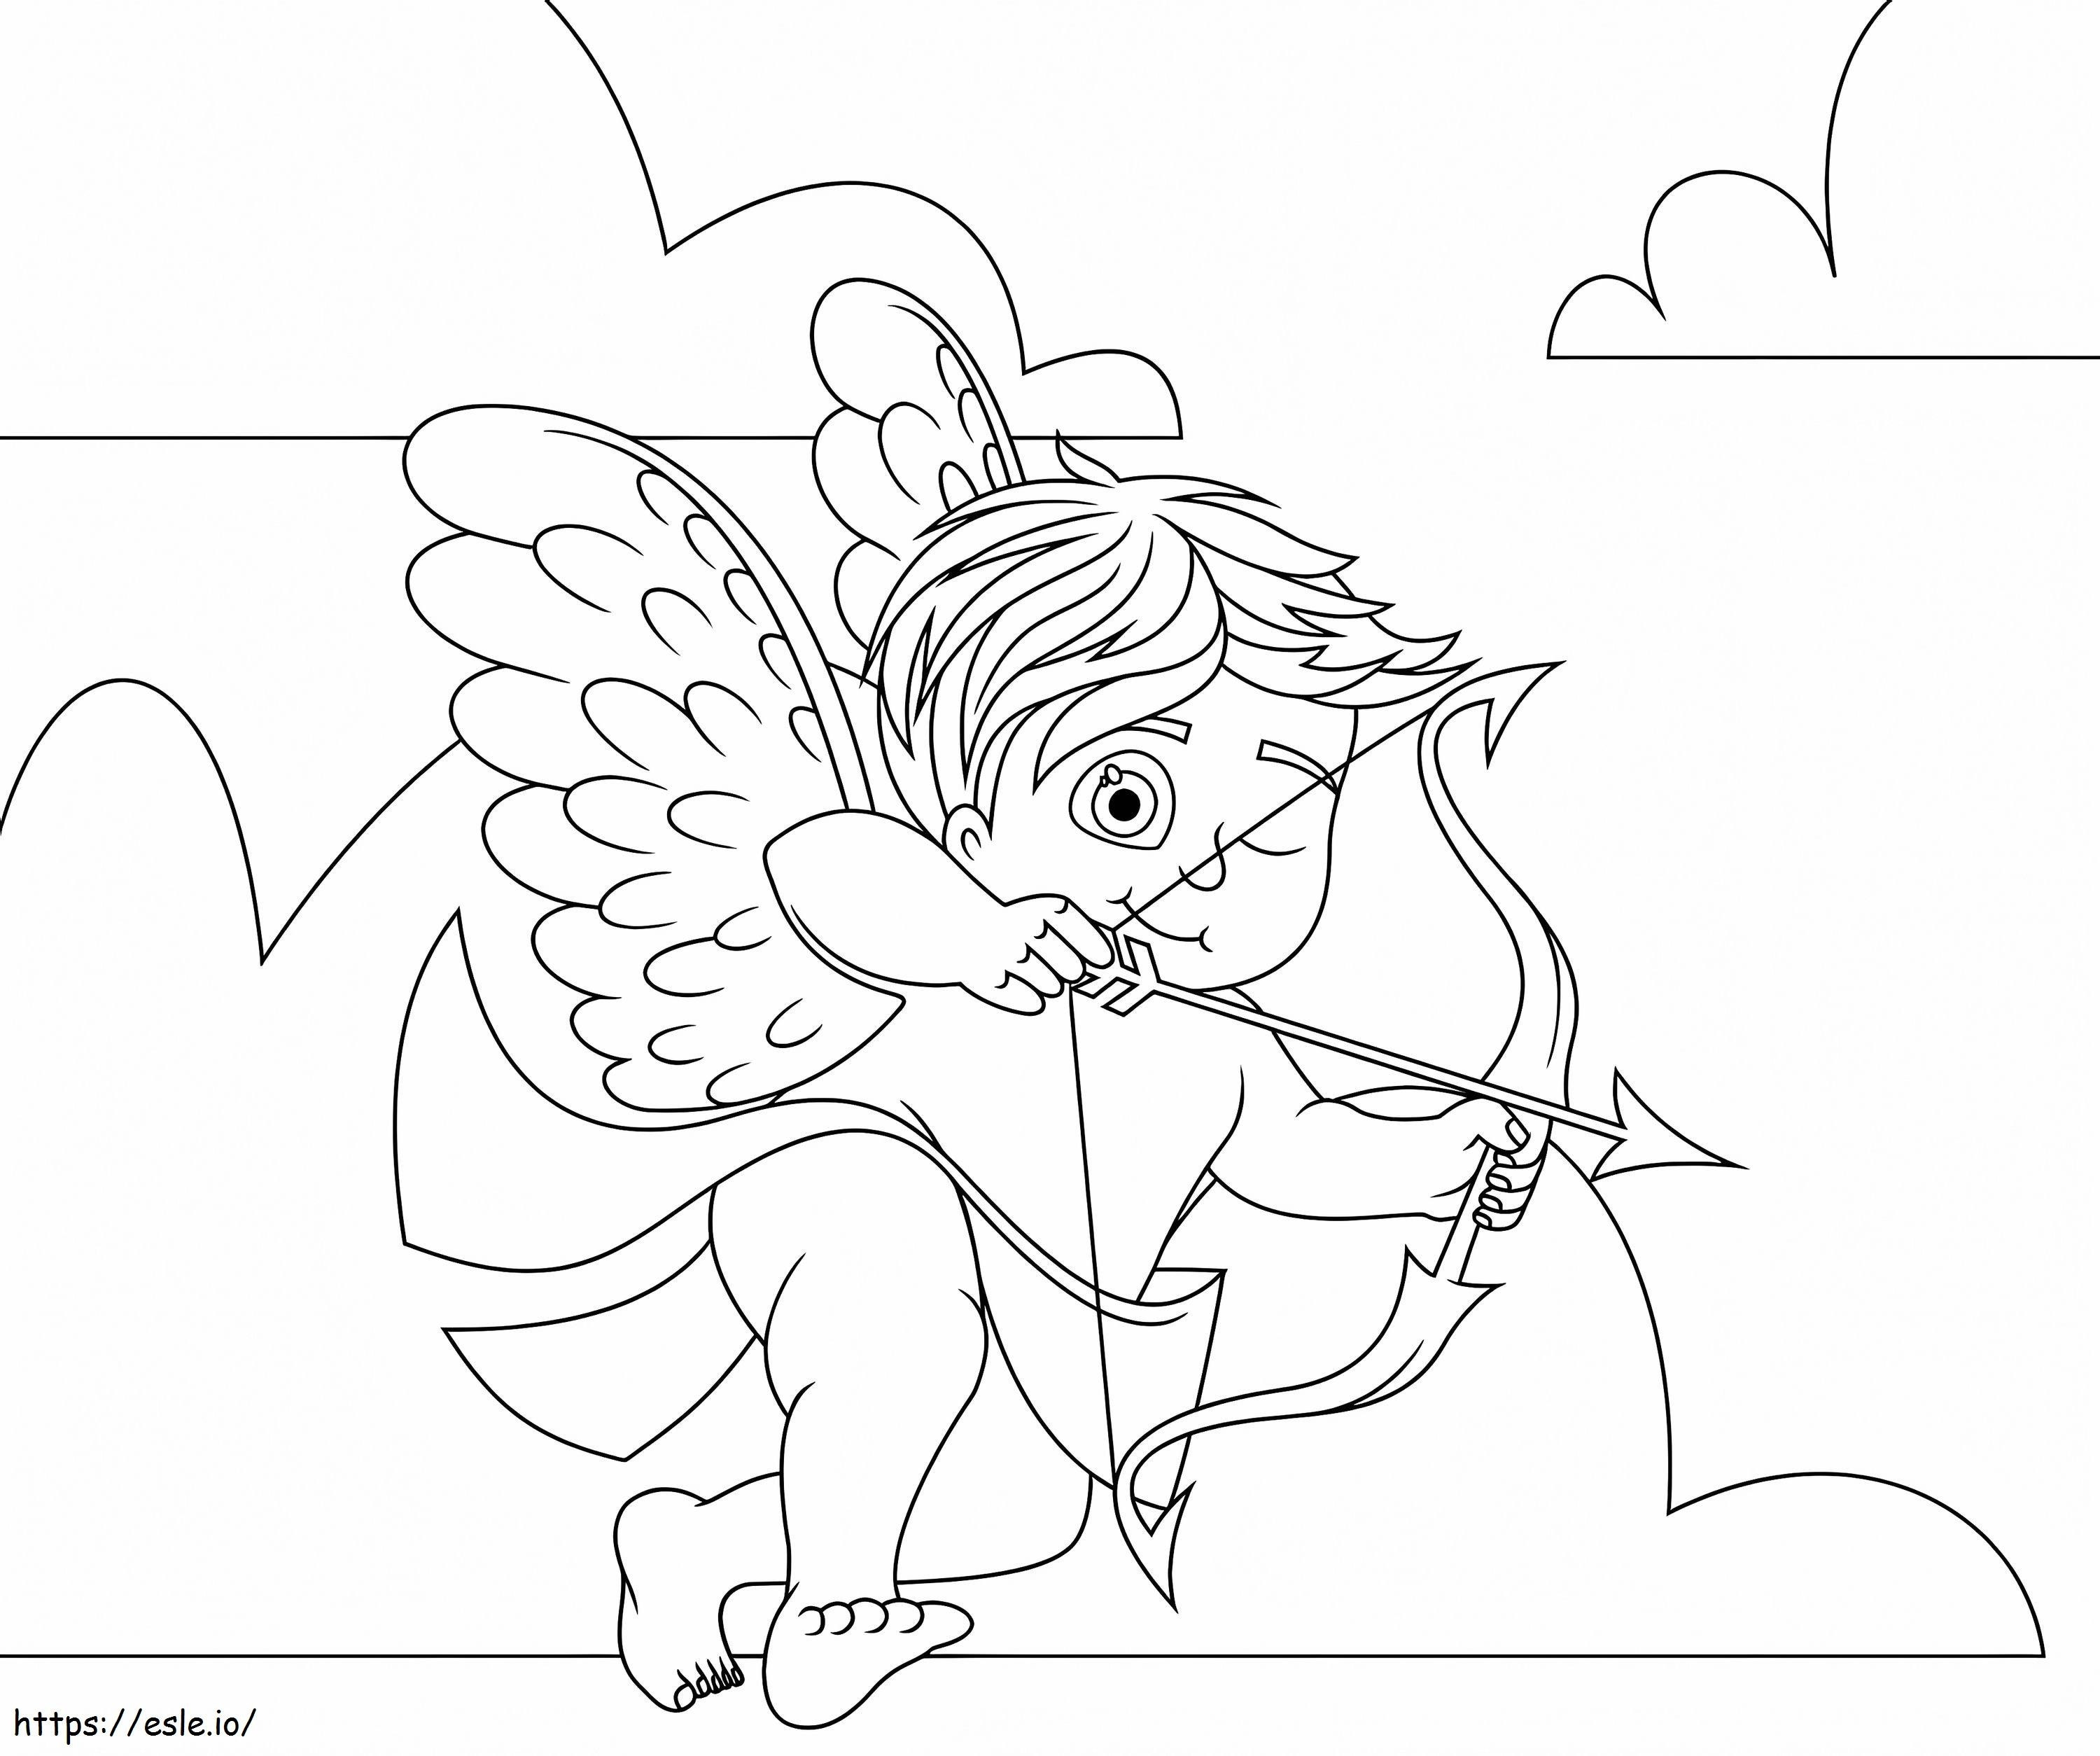 Cute Cupid coloring page